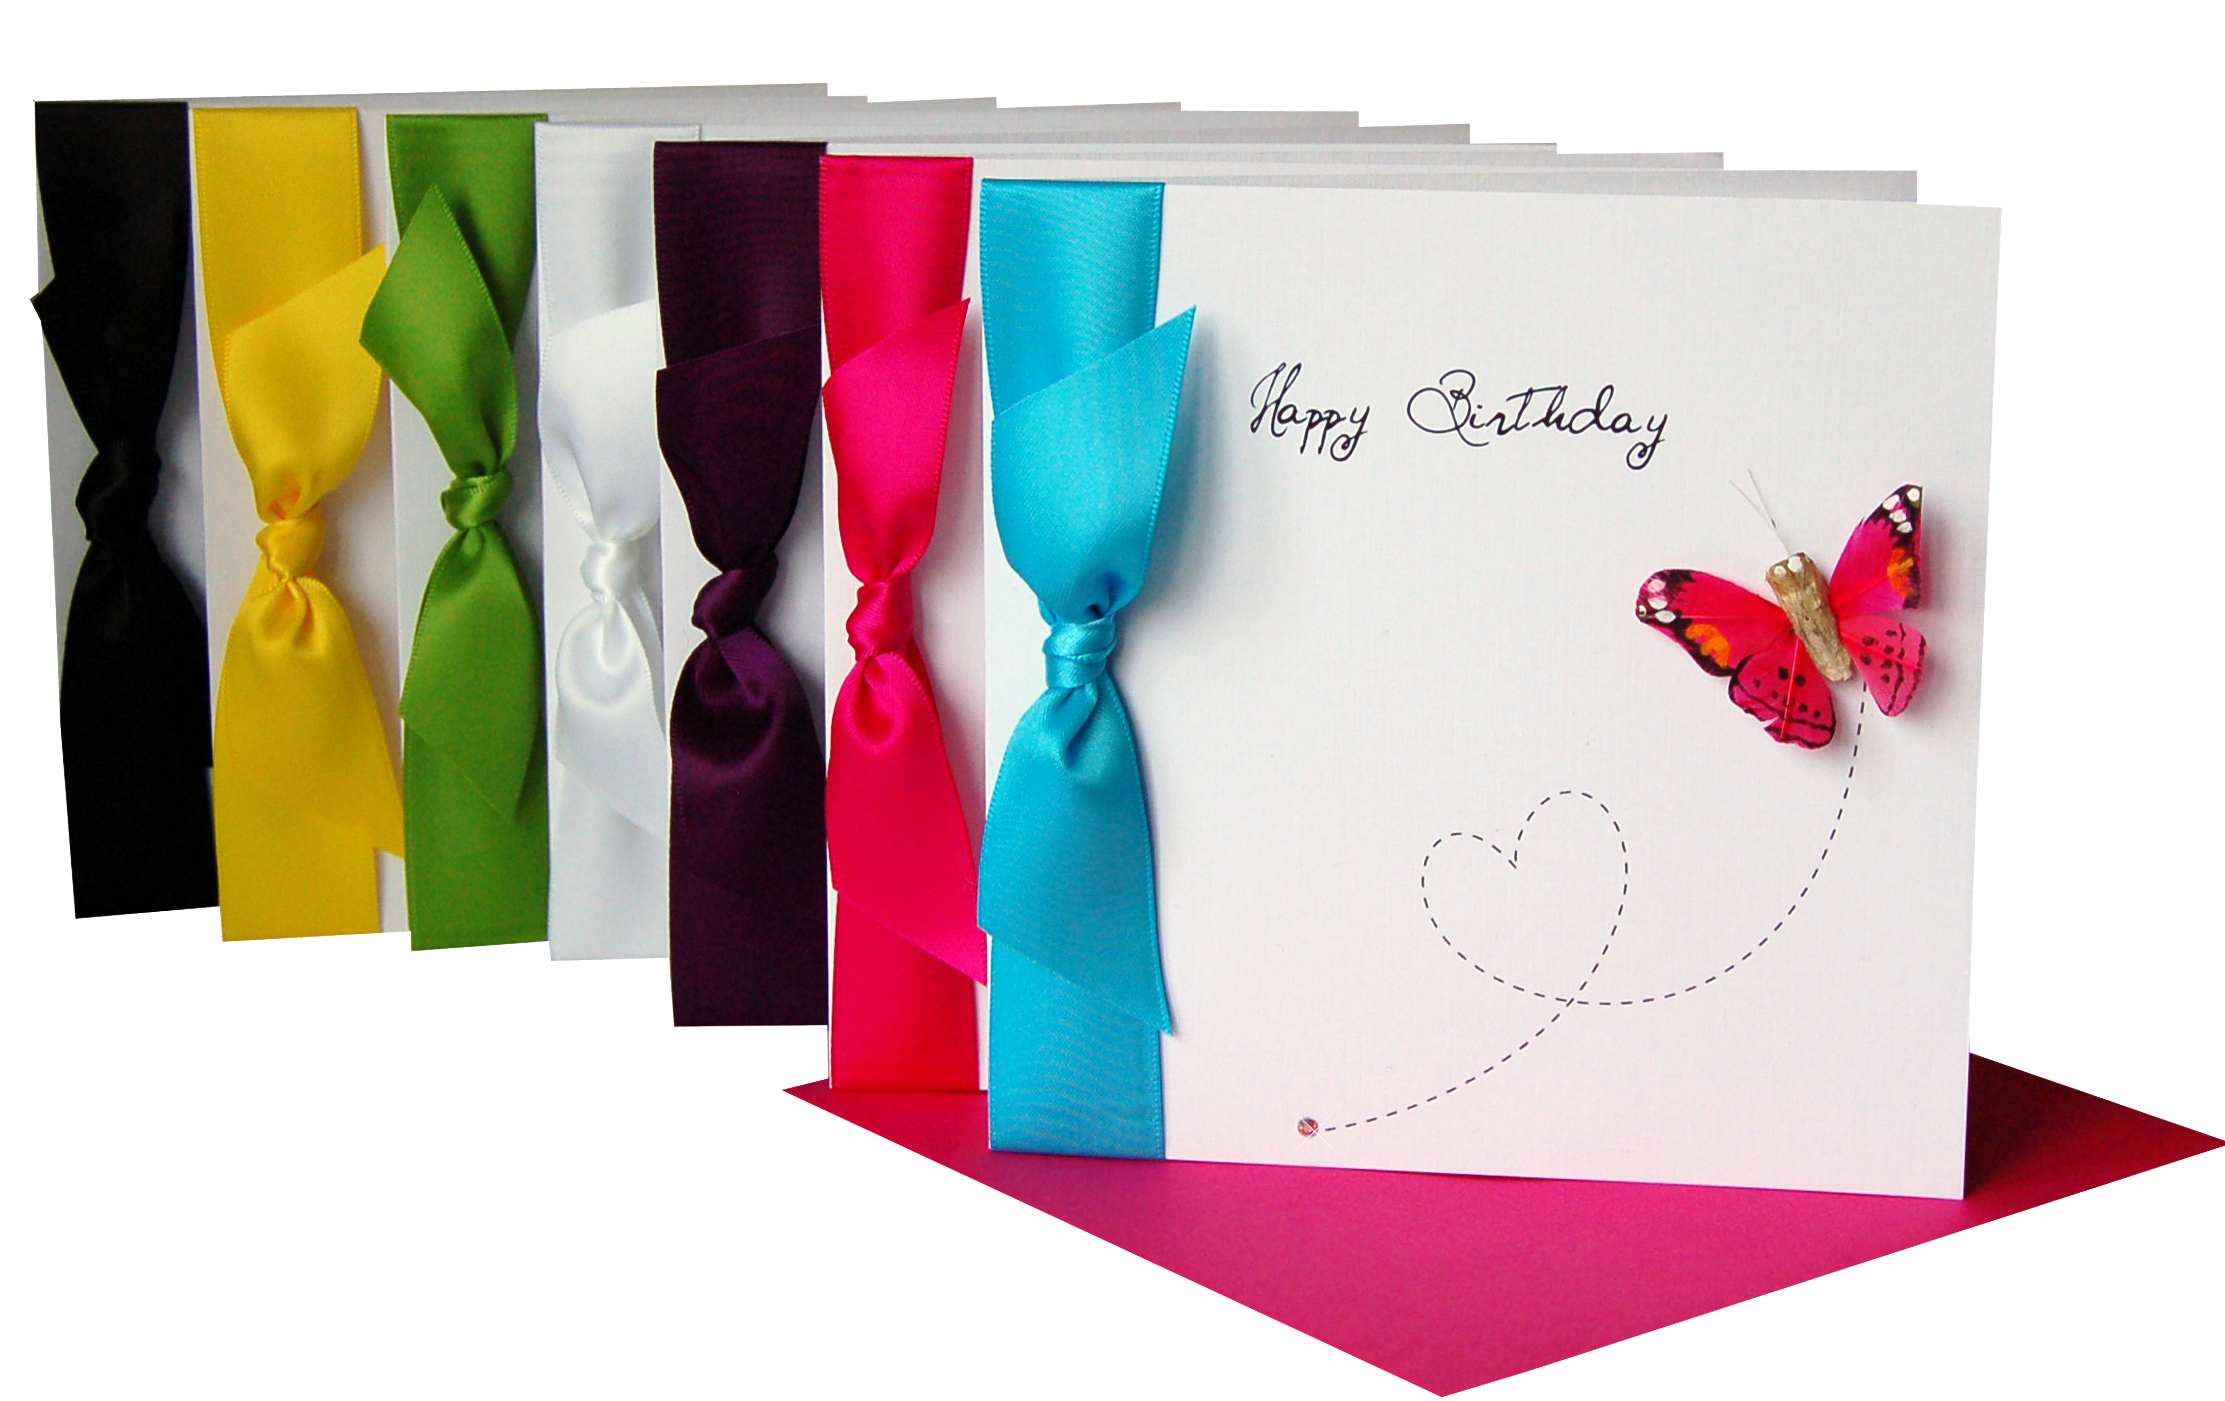 Handmade Birthday Invitation Cards Ideas How To Make Birthday Cards For Friends At Home How To Make Special